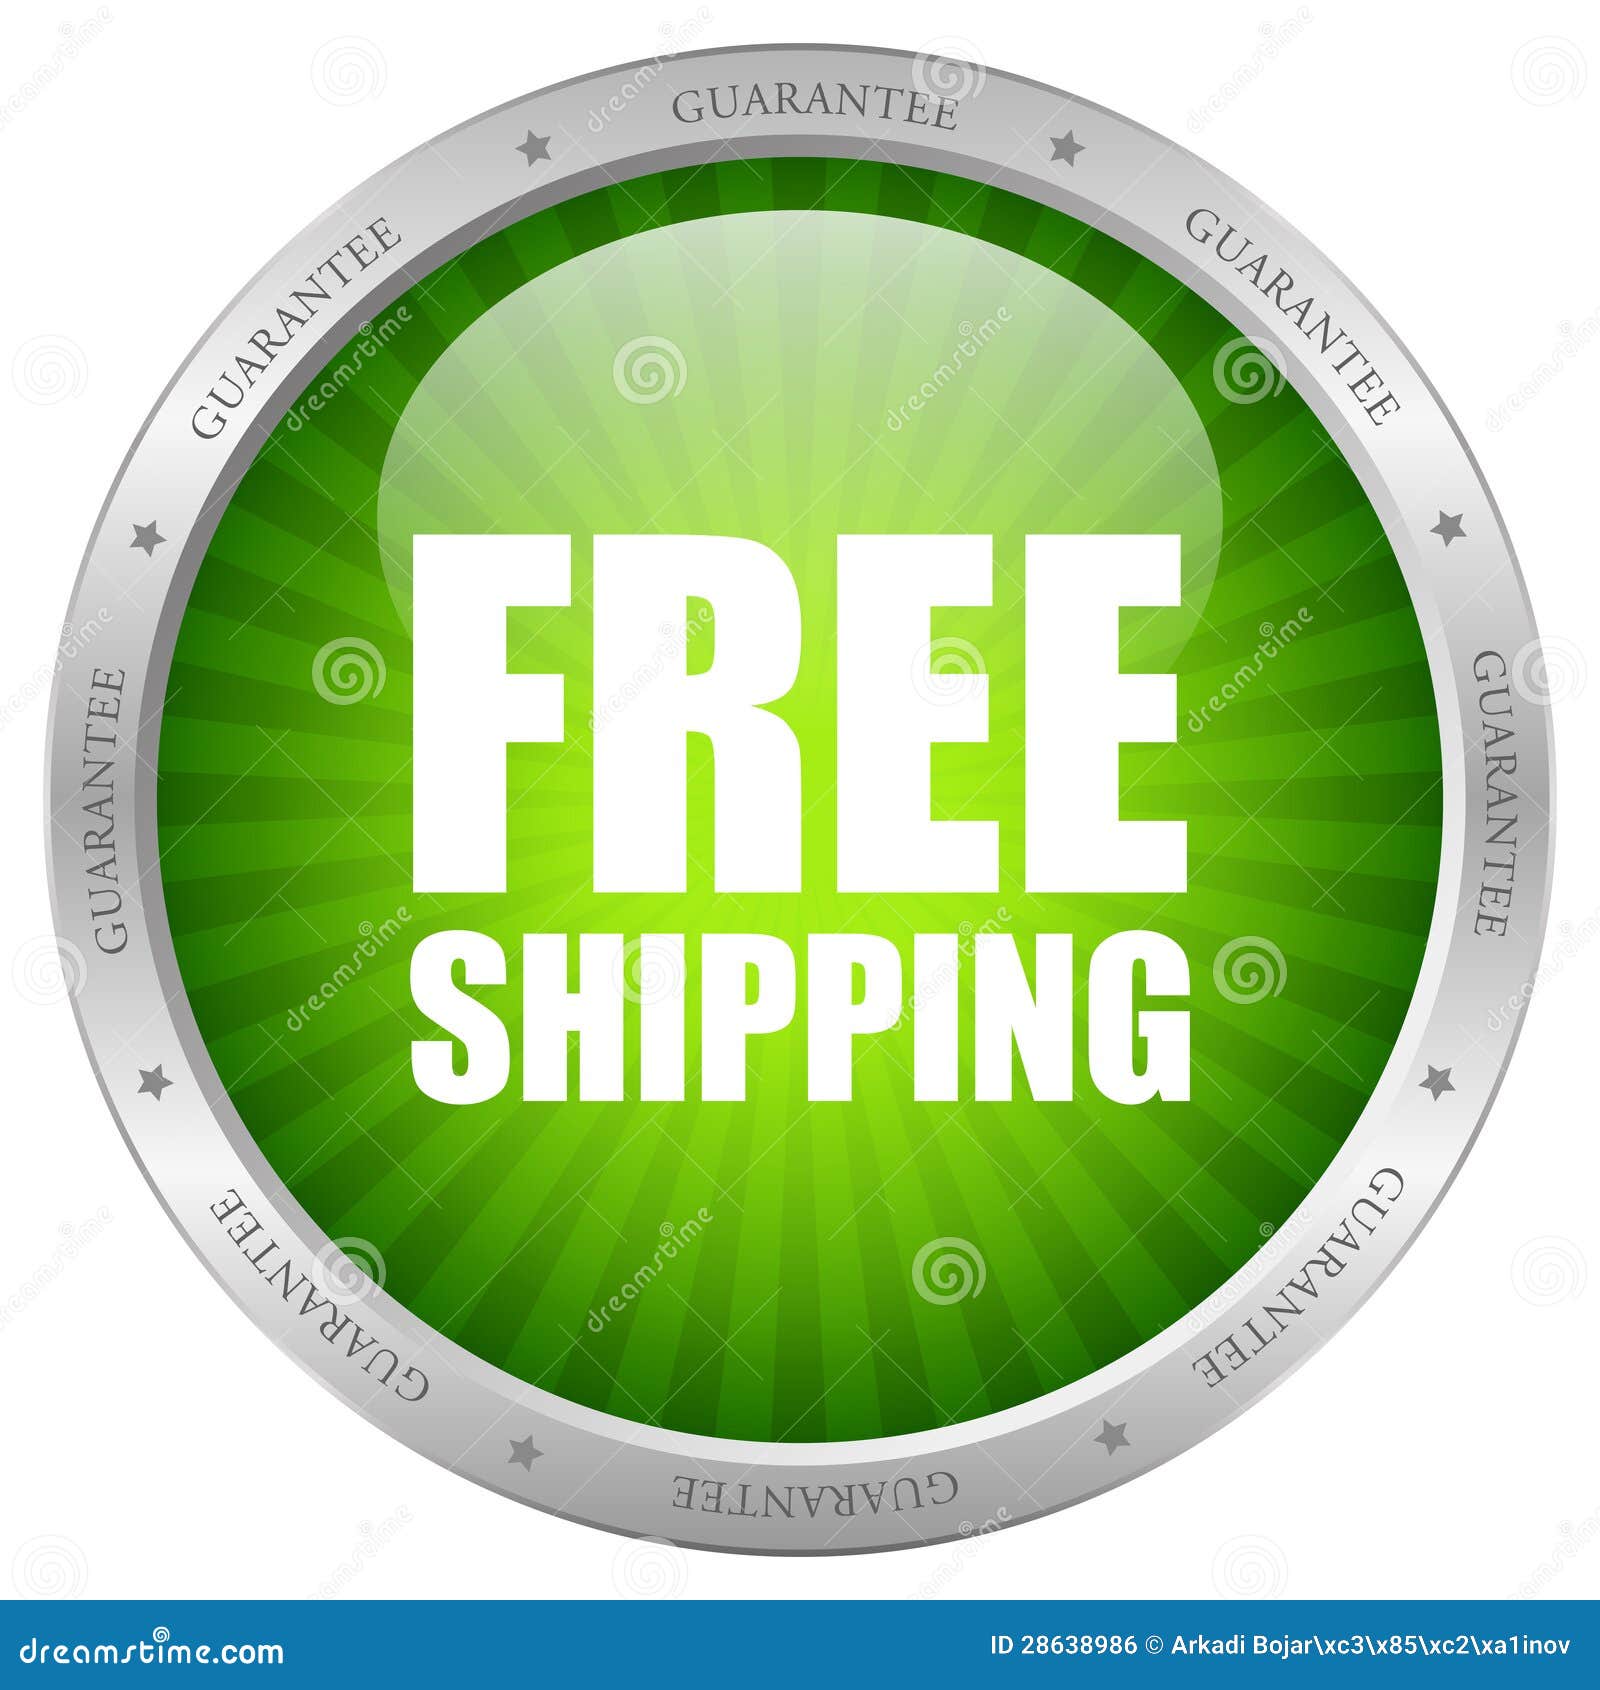 Free shipping icon stock vector. Illustration of online - 28638986